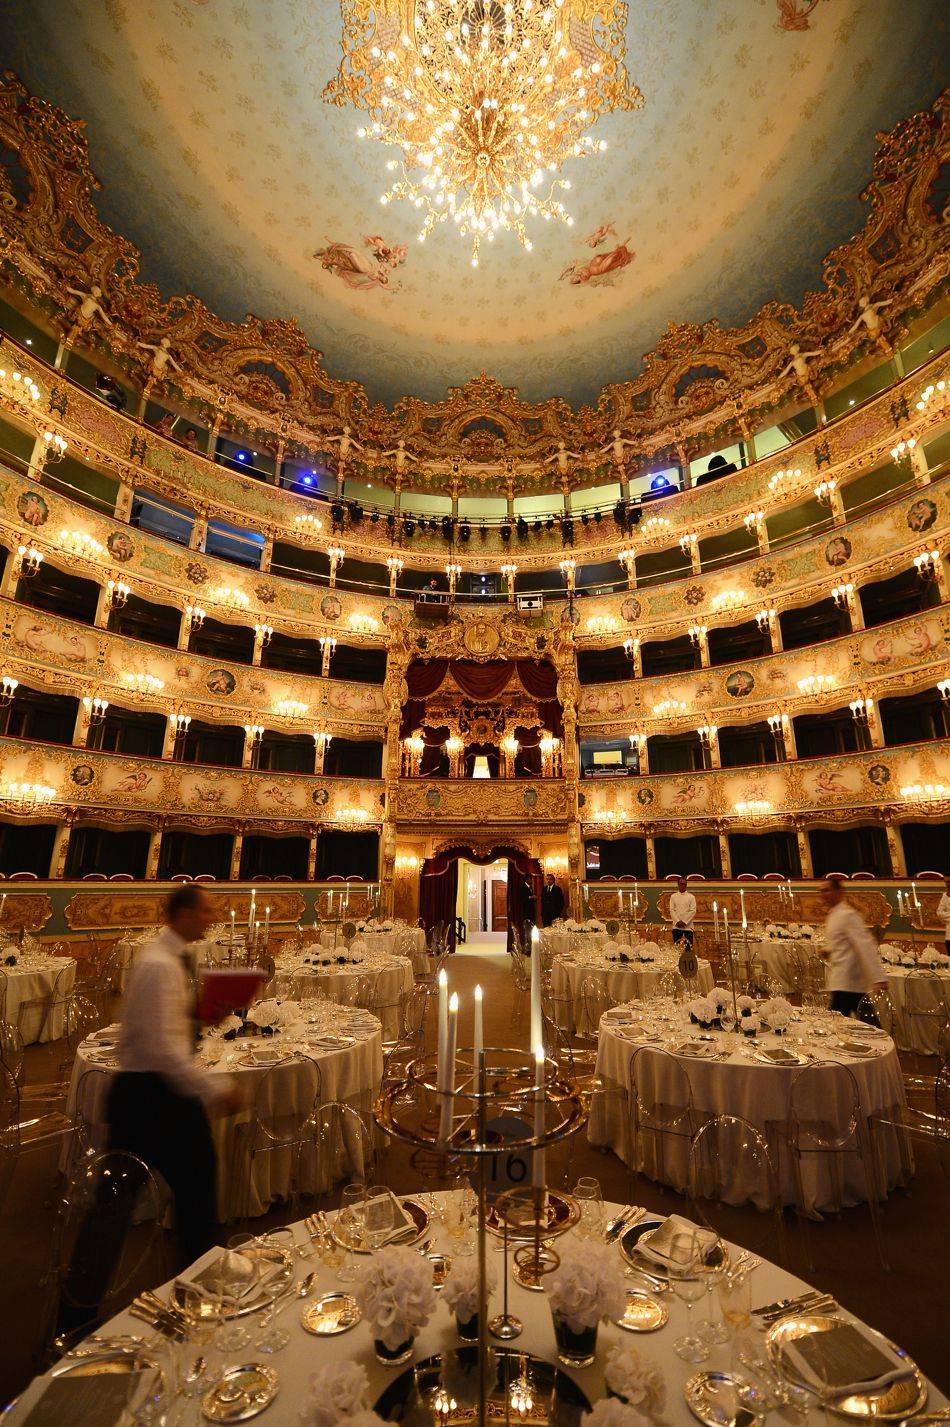 Distinguished guests from all around the world attended a celebratory gala dinner held at The Teatro La Fenice in Venice